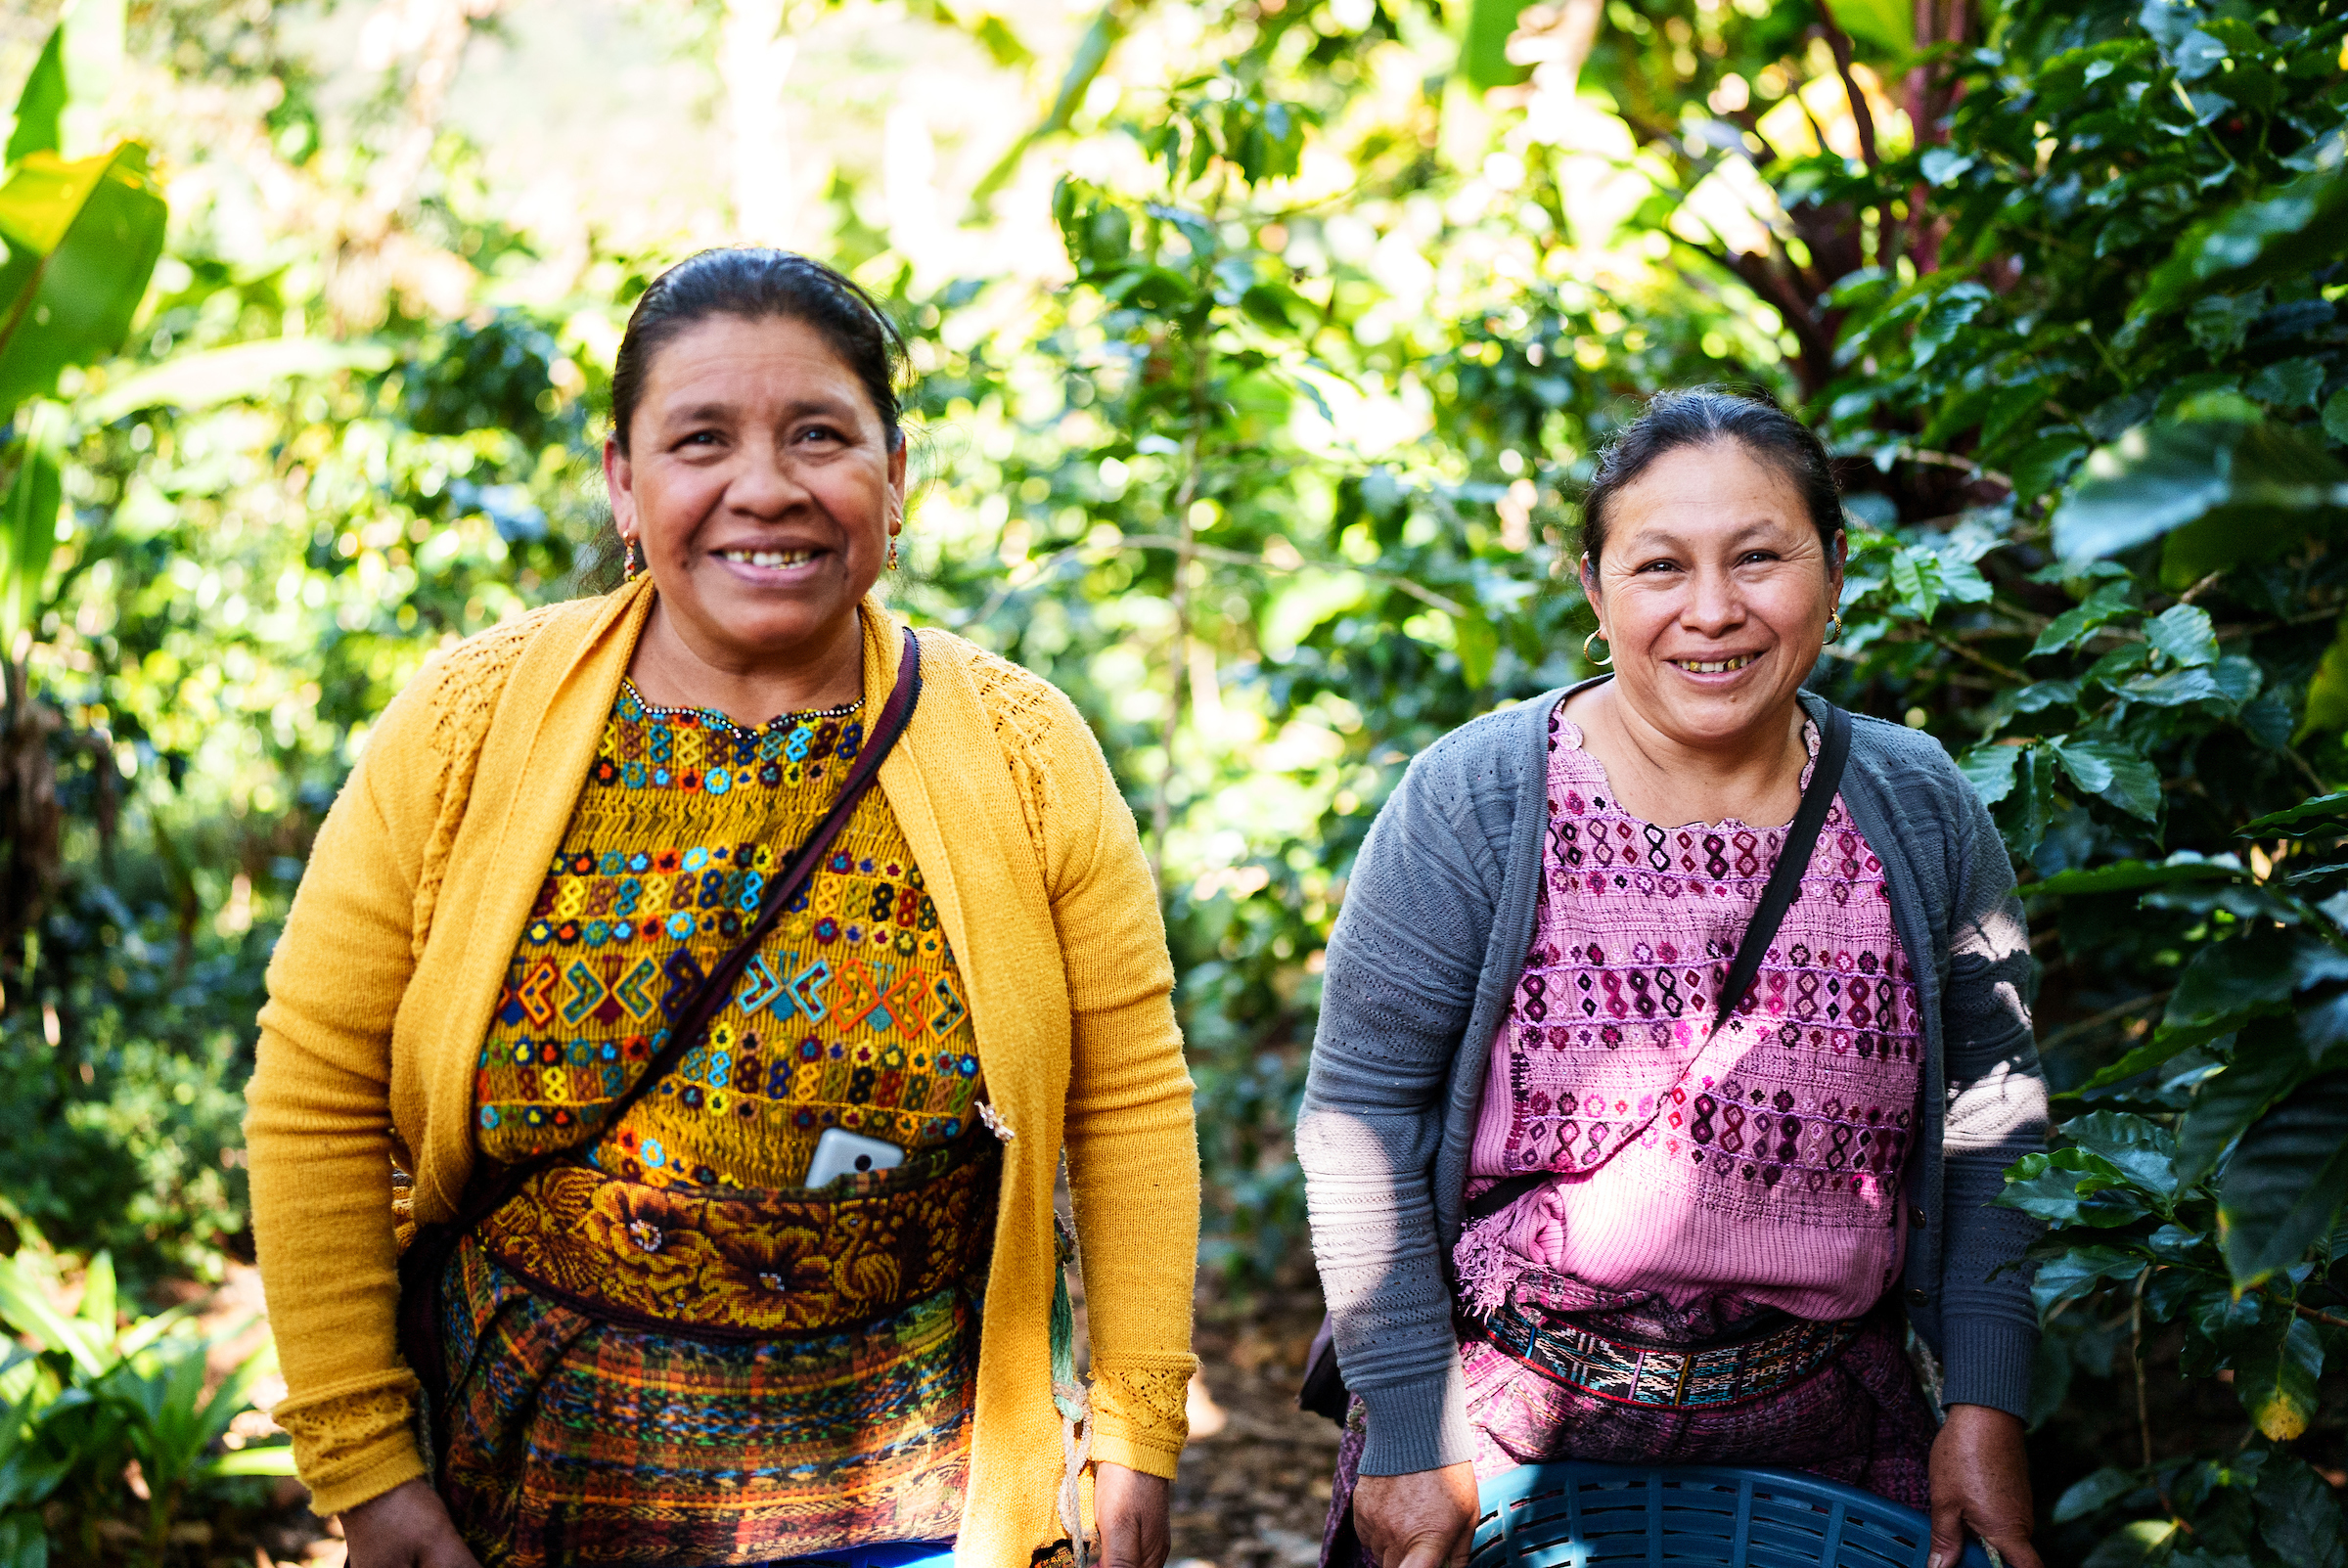 This photo was taken on a 2022 WAI trip to Guatemala. Credit: Root Capital/Adam Finch